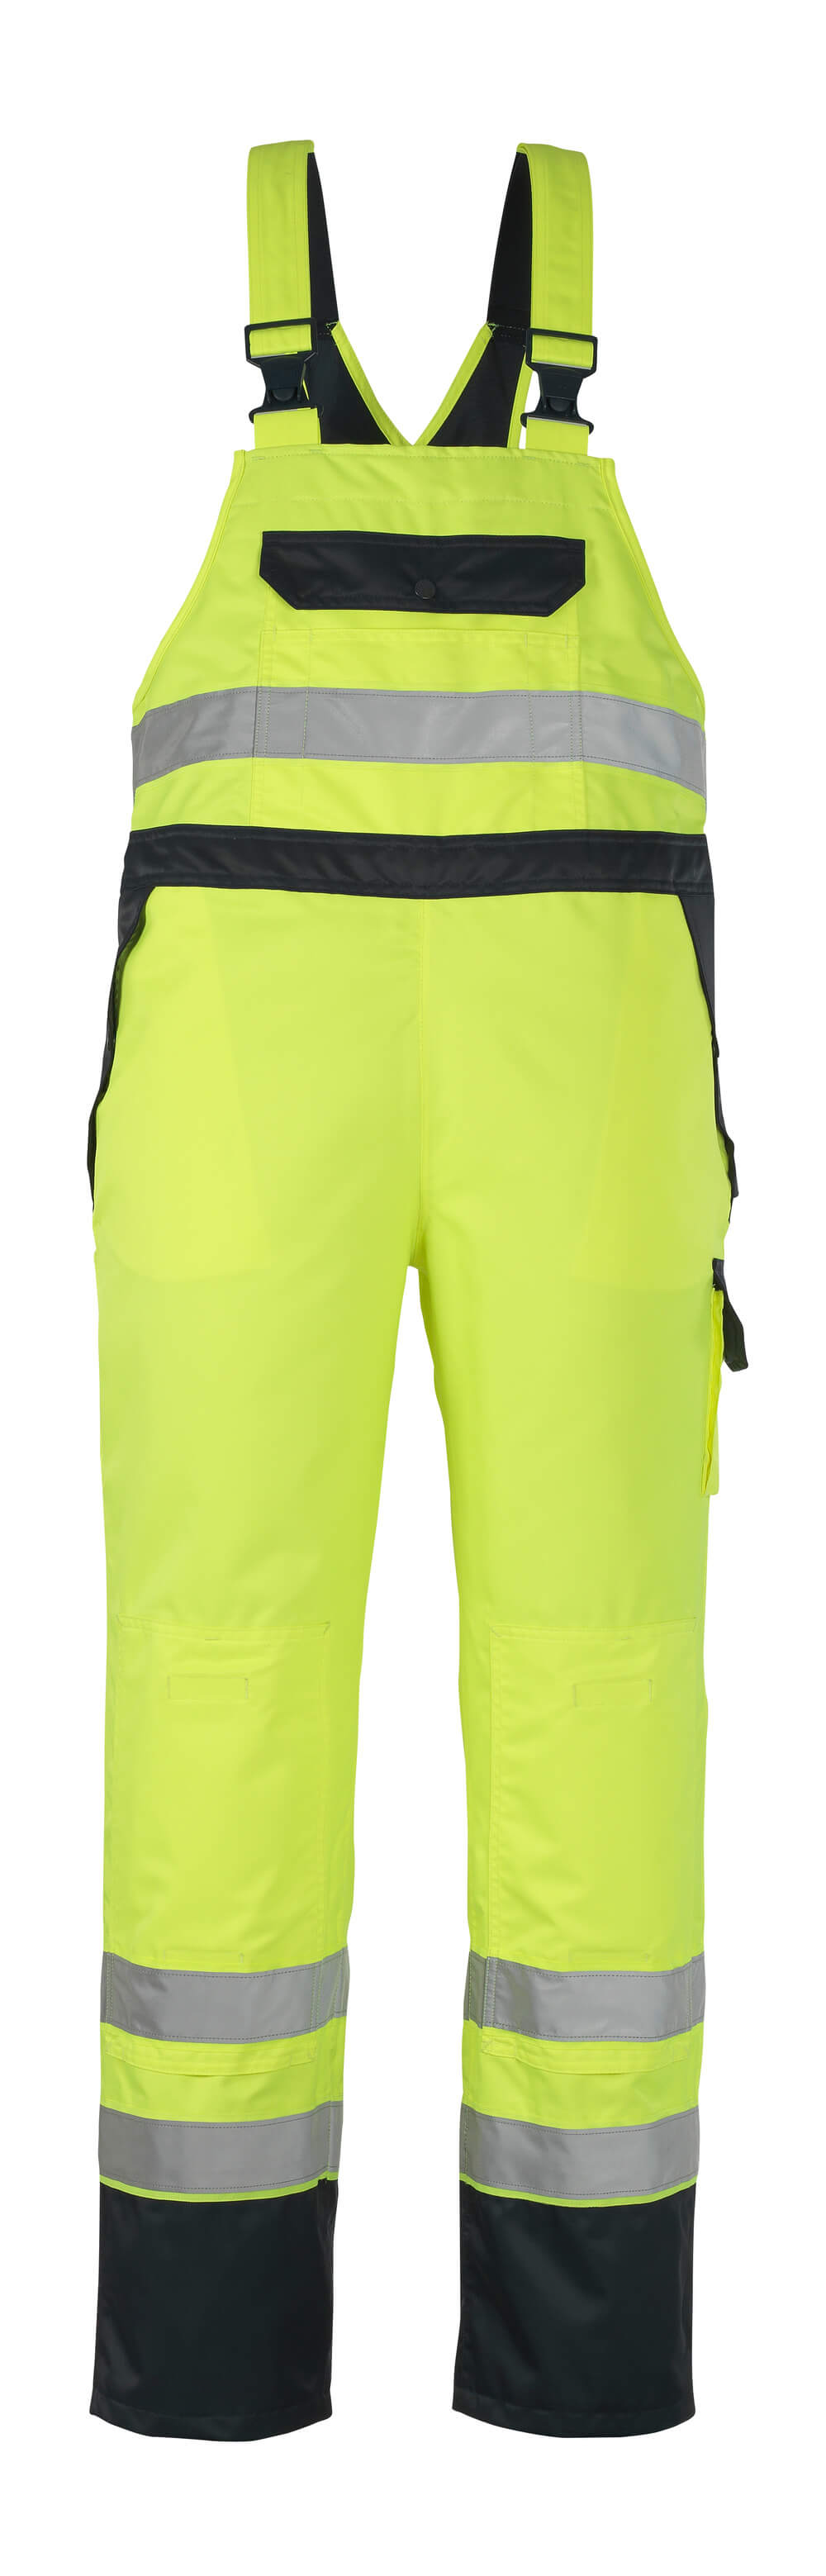 MASCOT 19078 Accelerate Safe Trousers With Kneepad Pockets  Womens   HiVis YellowDark Petroleum